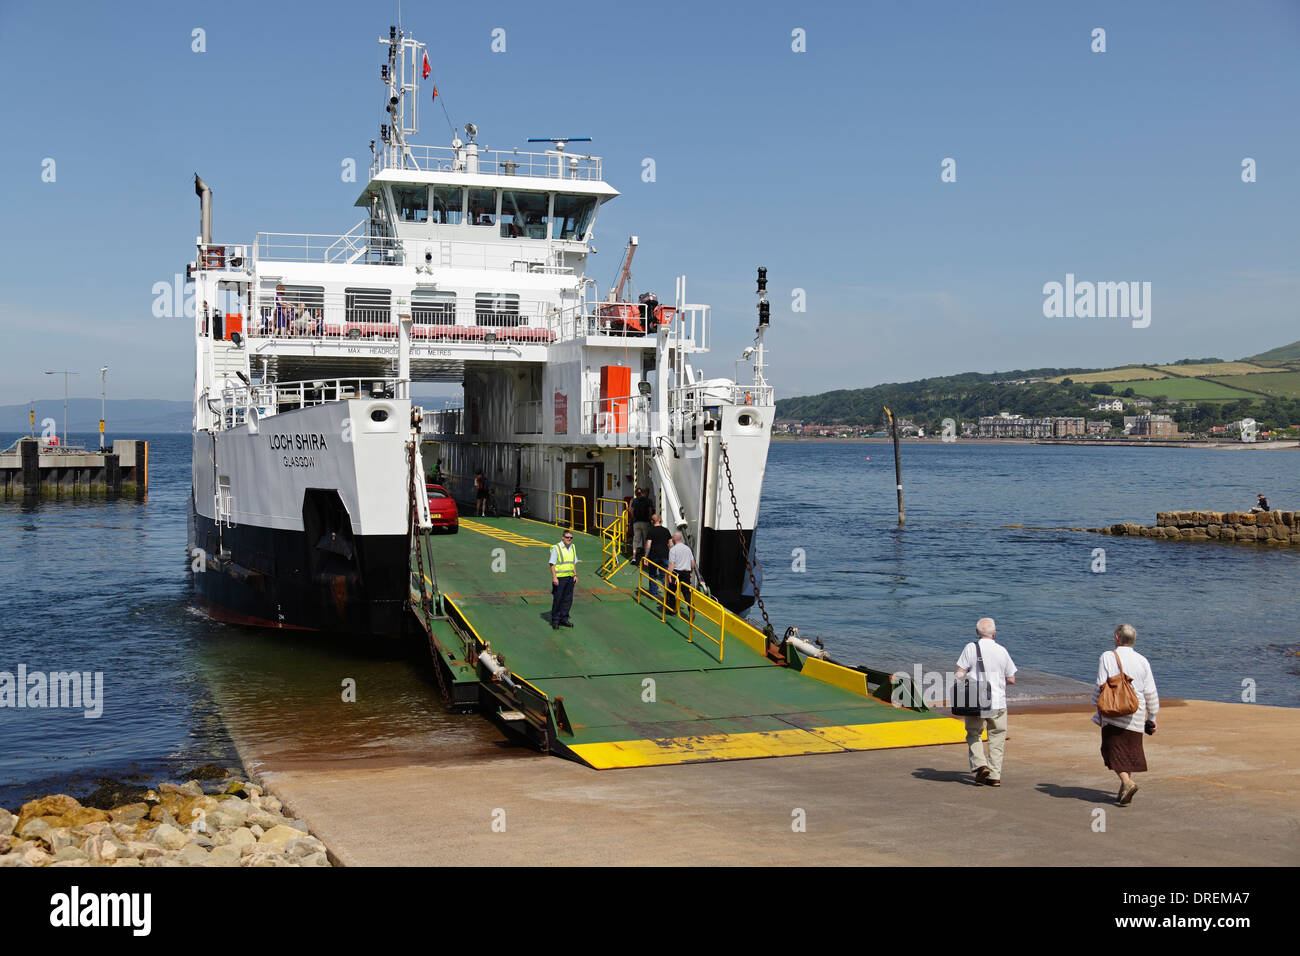 Passengers boarding a Calmac ferry on the slipway at Largs before sailing to the Island of Great Cumbrae in the Firth of Clyde, Scotland, UK Stock Photo